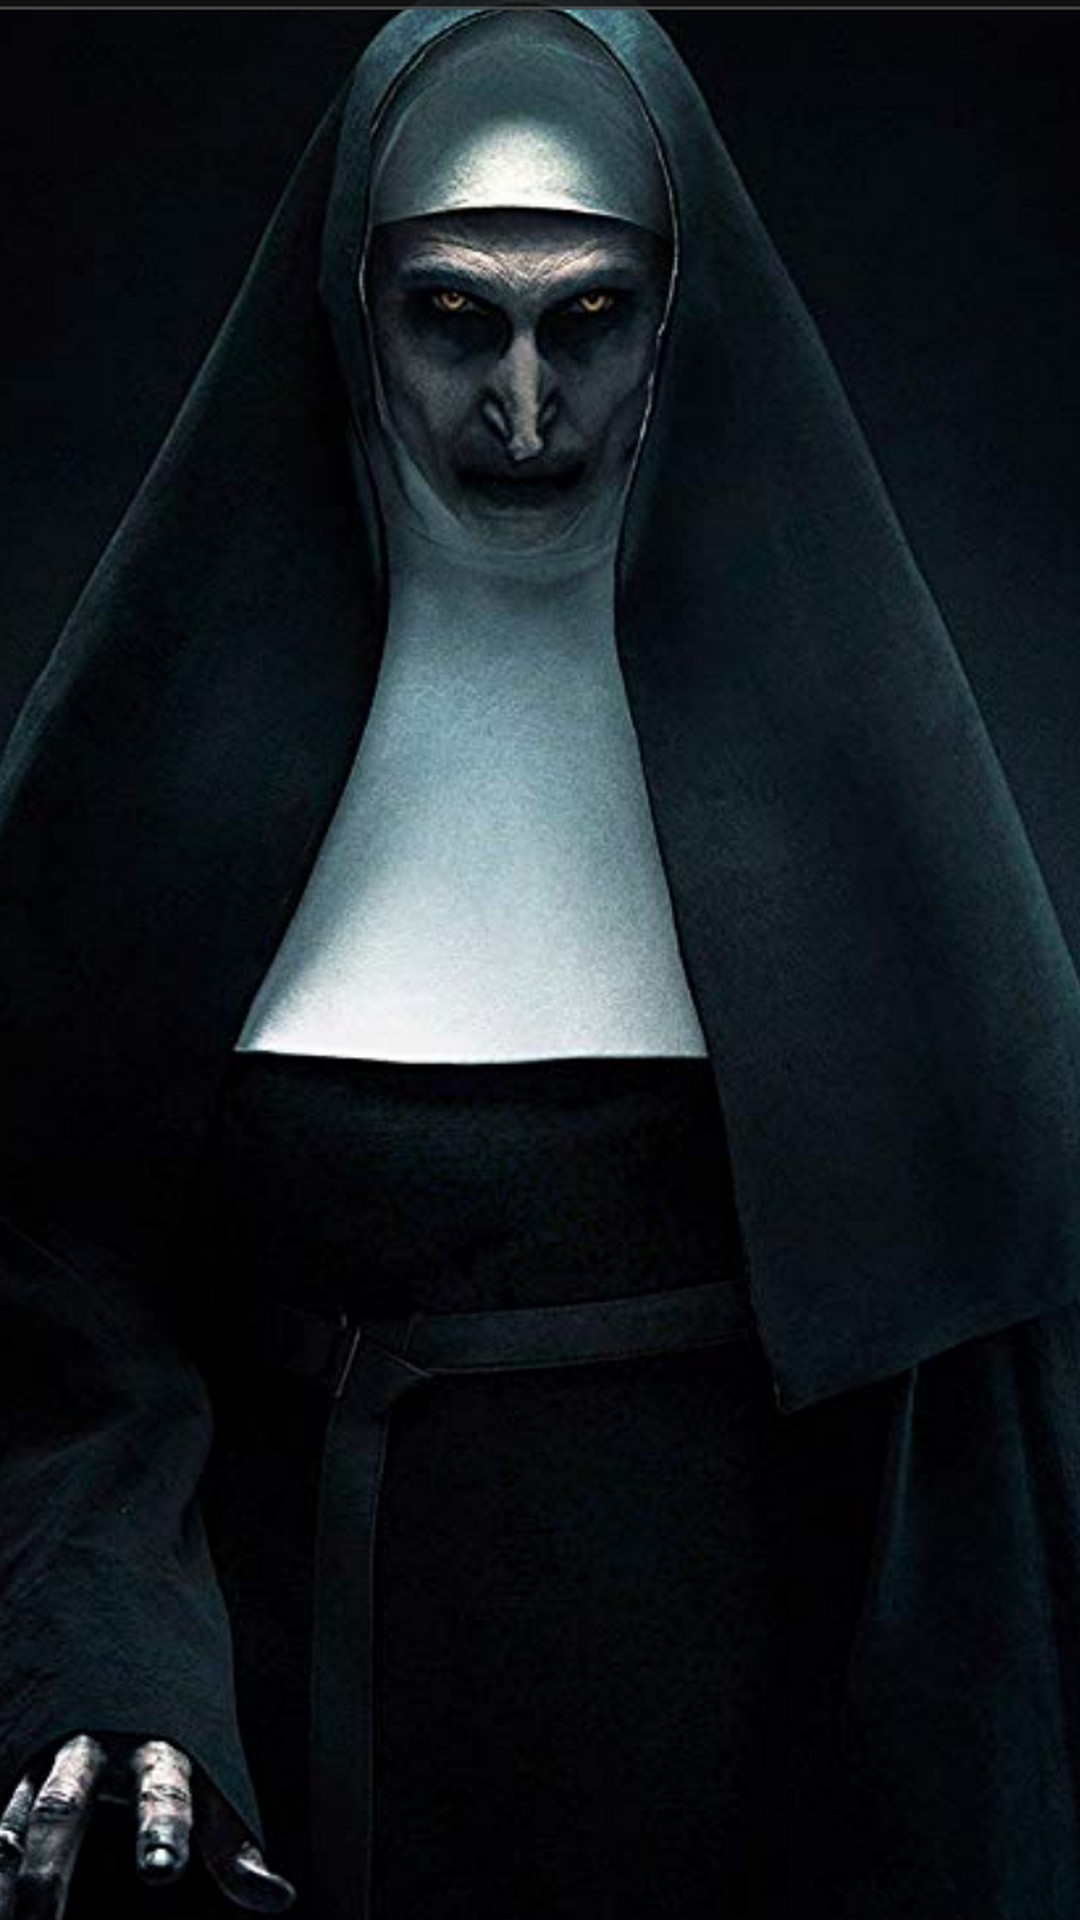 The Nun Android Wallpaper with resolution 1080X1920 pixel. You can make this wallpaper for your Android backgrounds, Tablet, Smartphones Screensavers and Mobile Phone Lock Screen